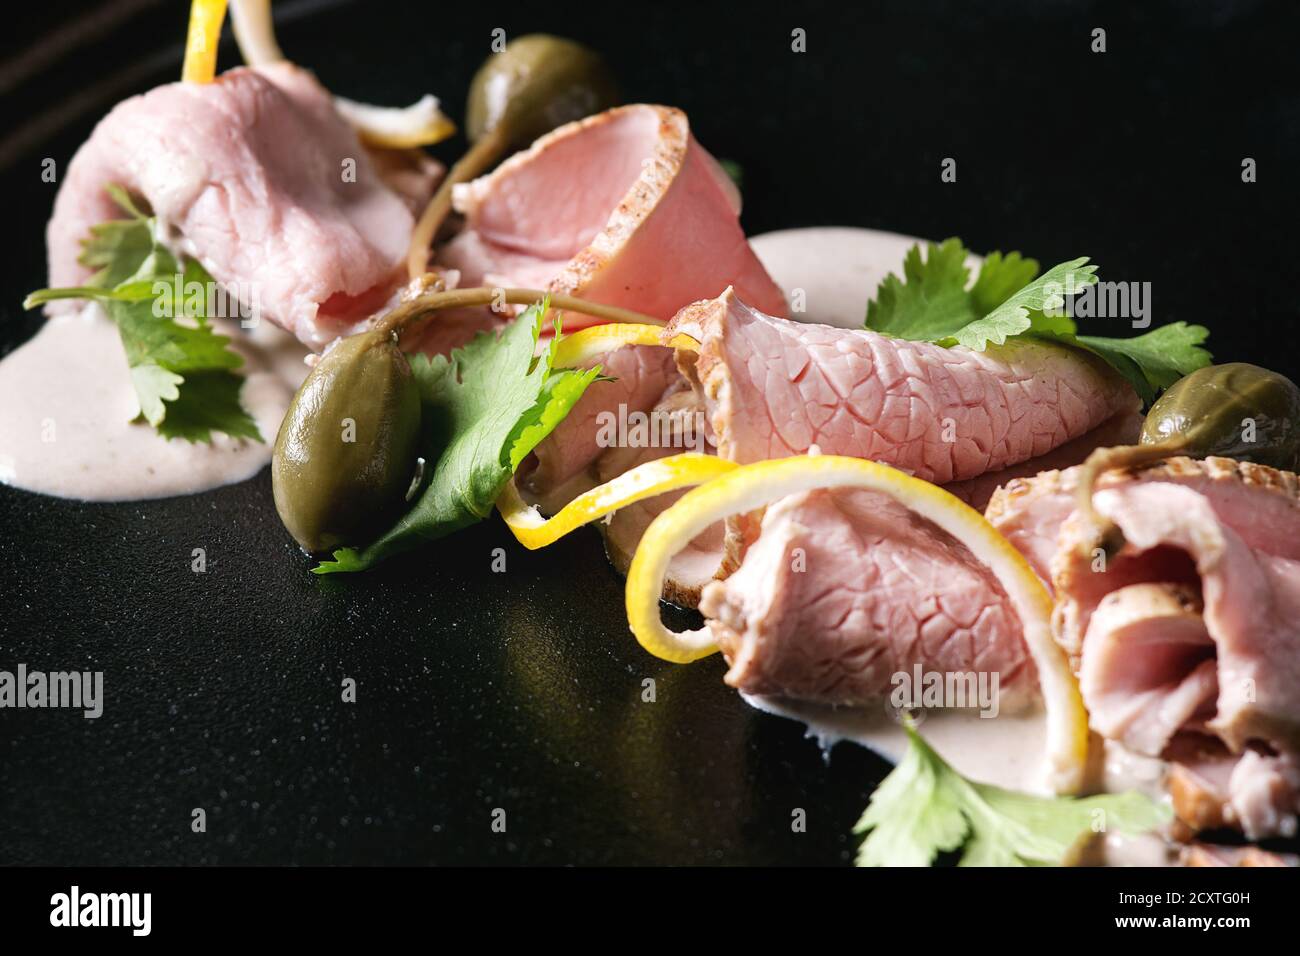 Vitello tonnato italian dish. Thin sliced veal with tuna sauce, capers and coriander served on black plate. Close up Stock Photo